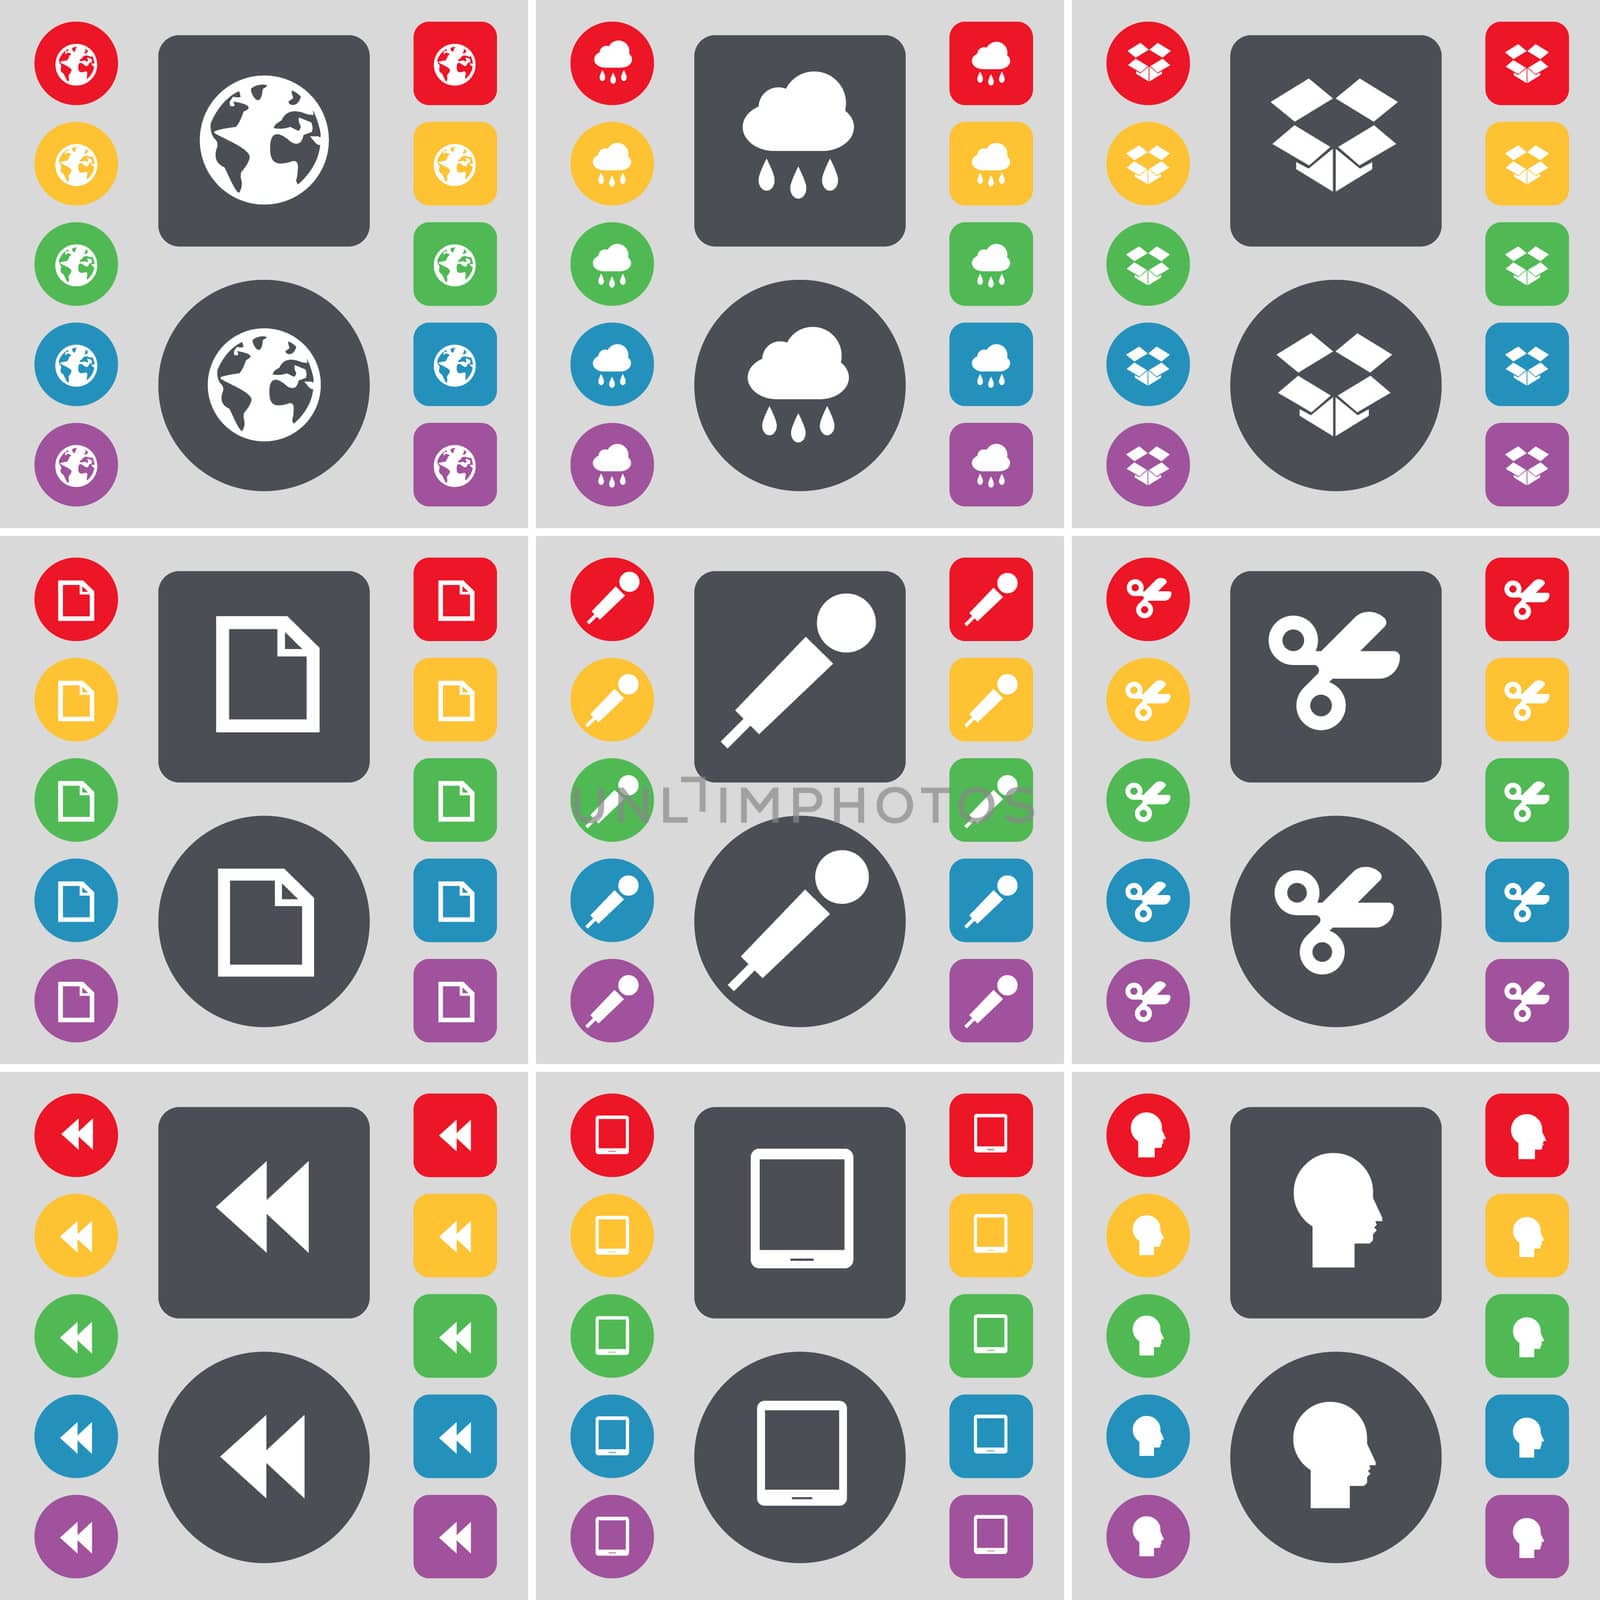 Earth, Cloud, Dropbox, File, Microphone, Scissors, Rewind, Tablet PC, Silhouette icon symbol. A large set of flat, colored buttons for your design. illustration